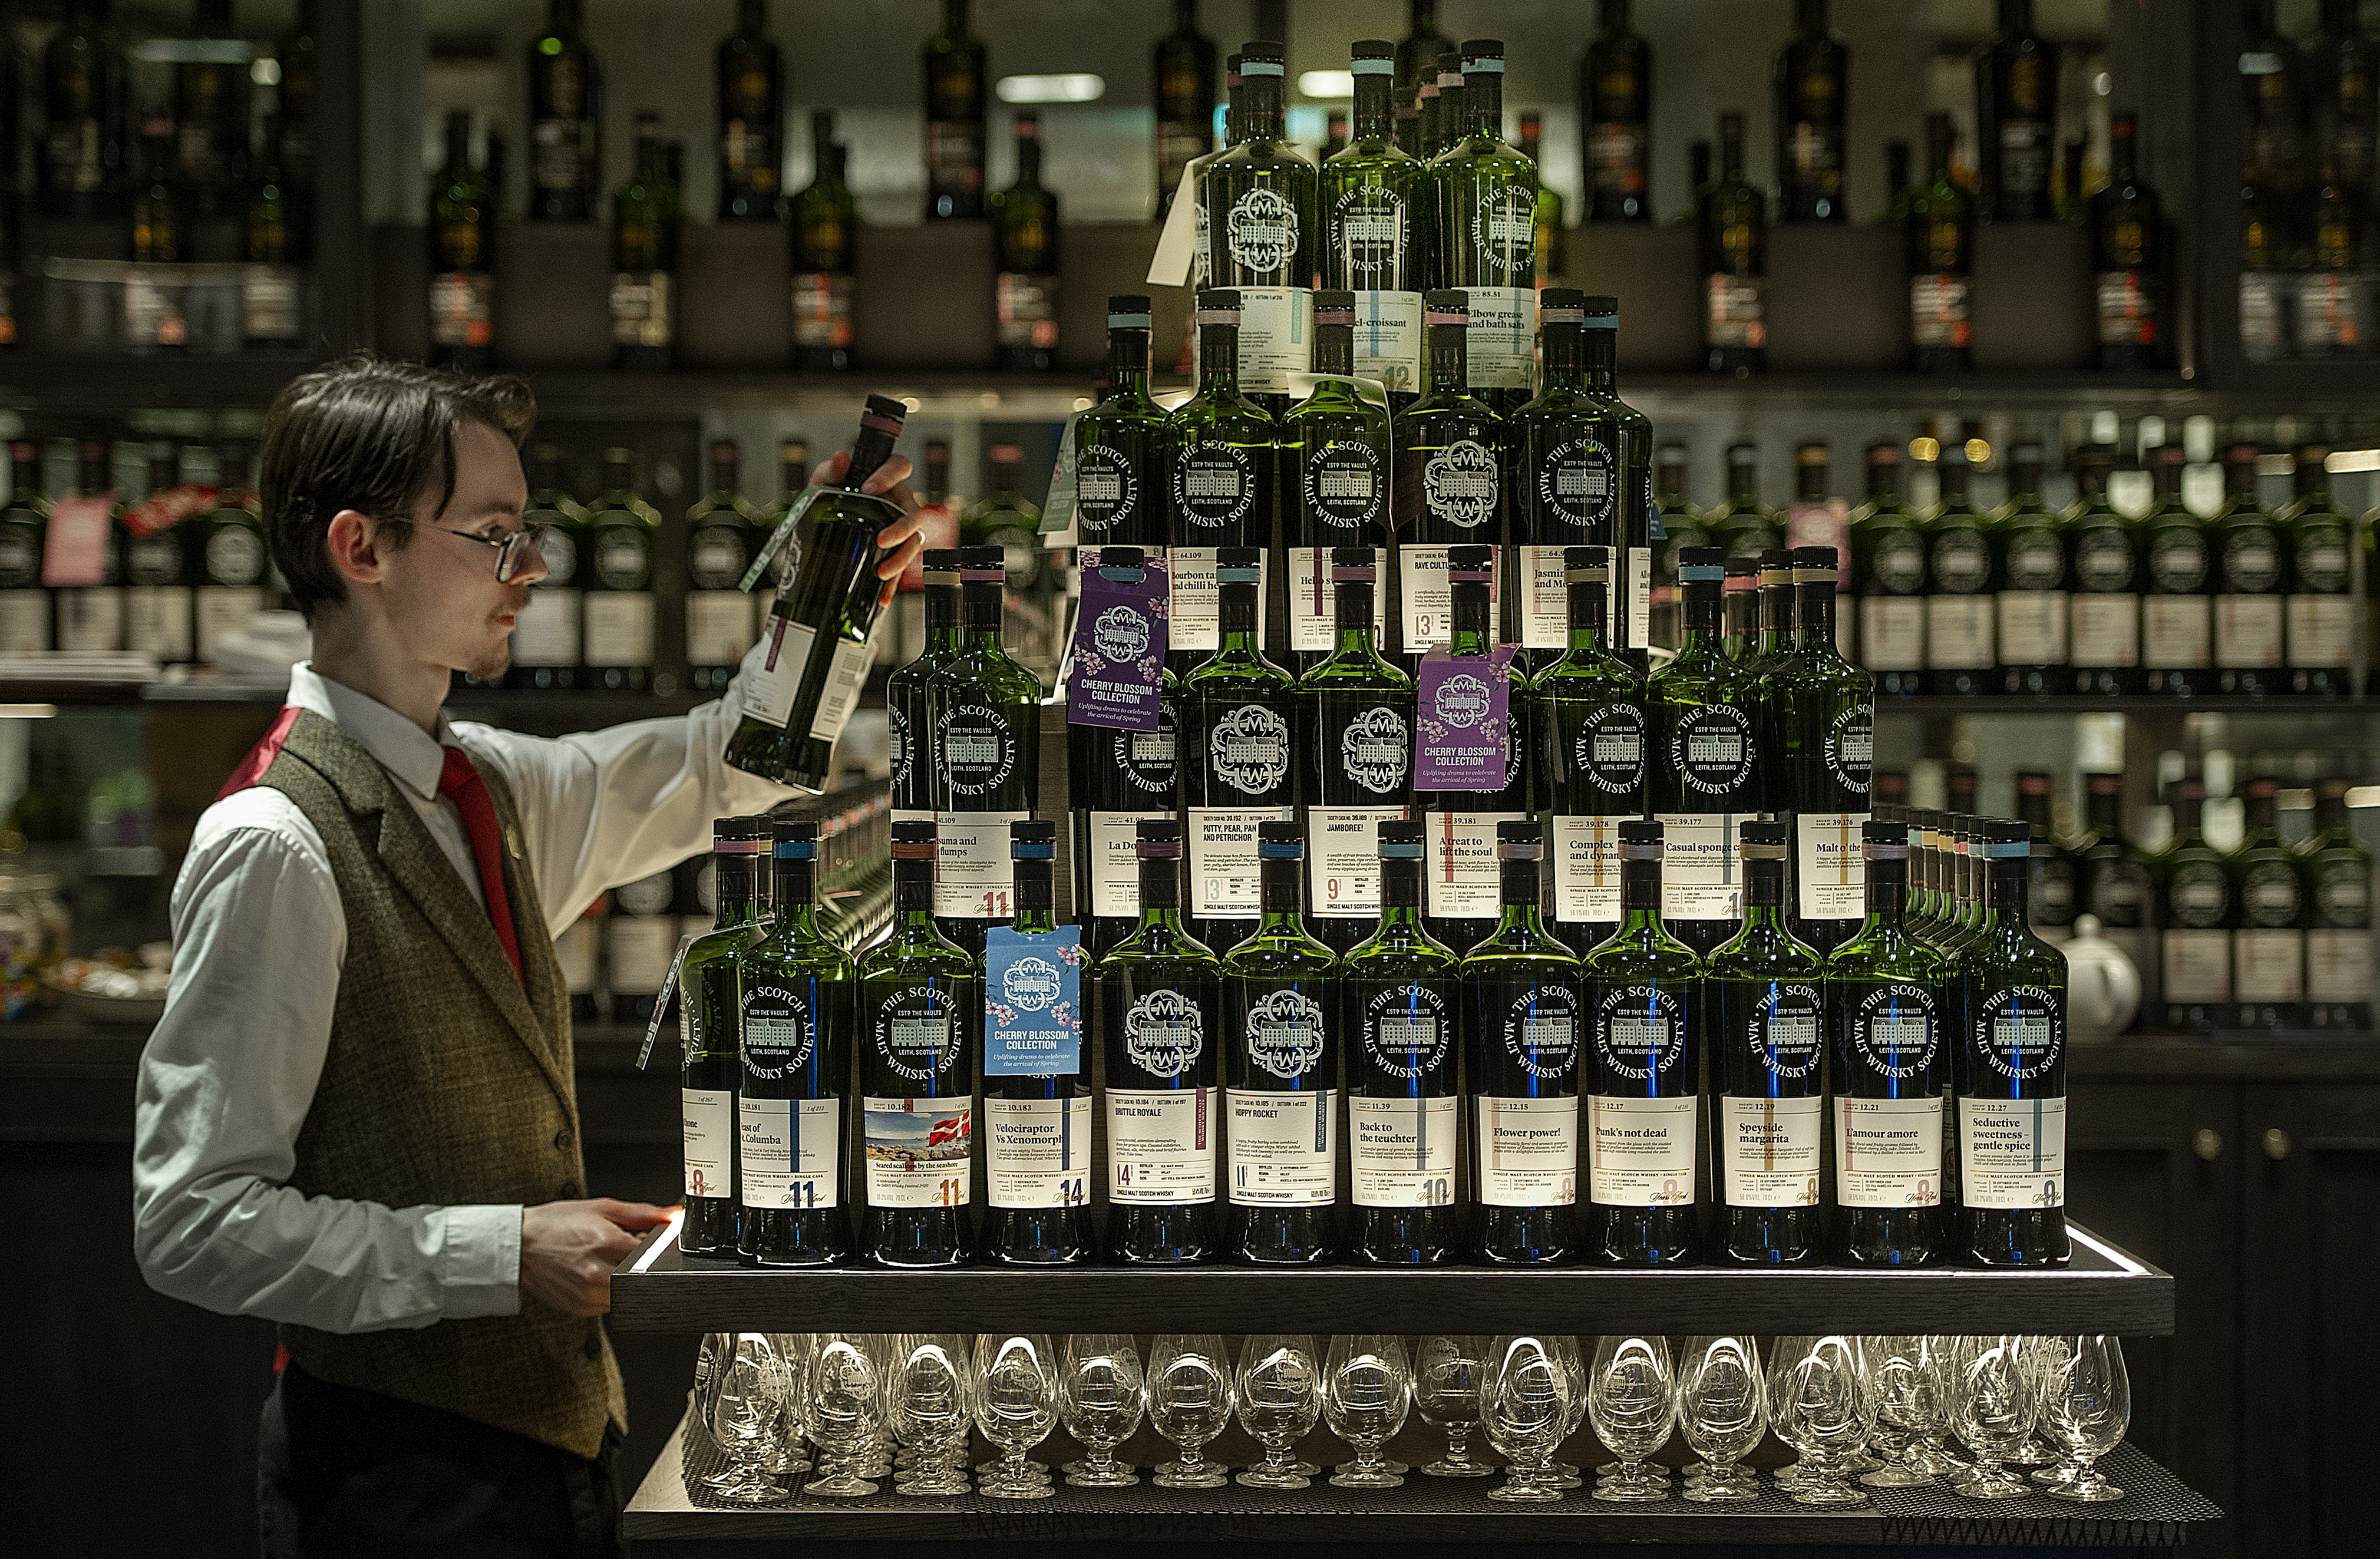 Artisanal Spirits Company sees revenues rise to £18m in 2021